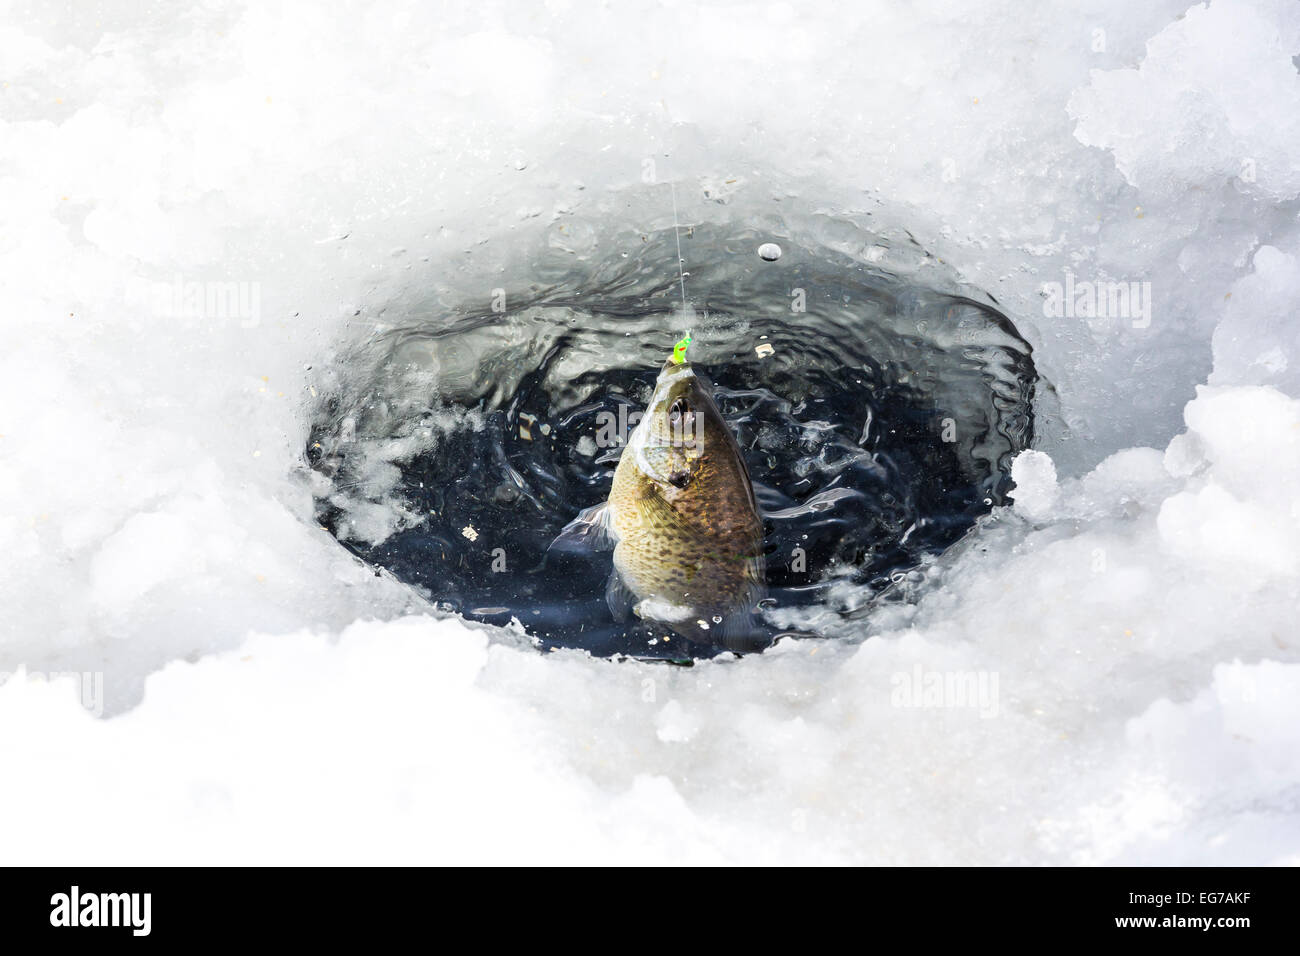 Bluegill, Lepomis macrochirus, being lifted out of a hole made by an ice auger, while ice fishing in central Michigan, USA Stock Photo